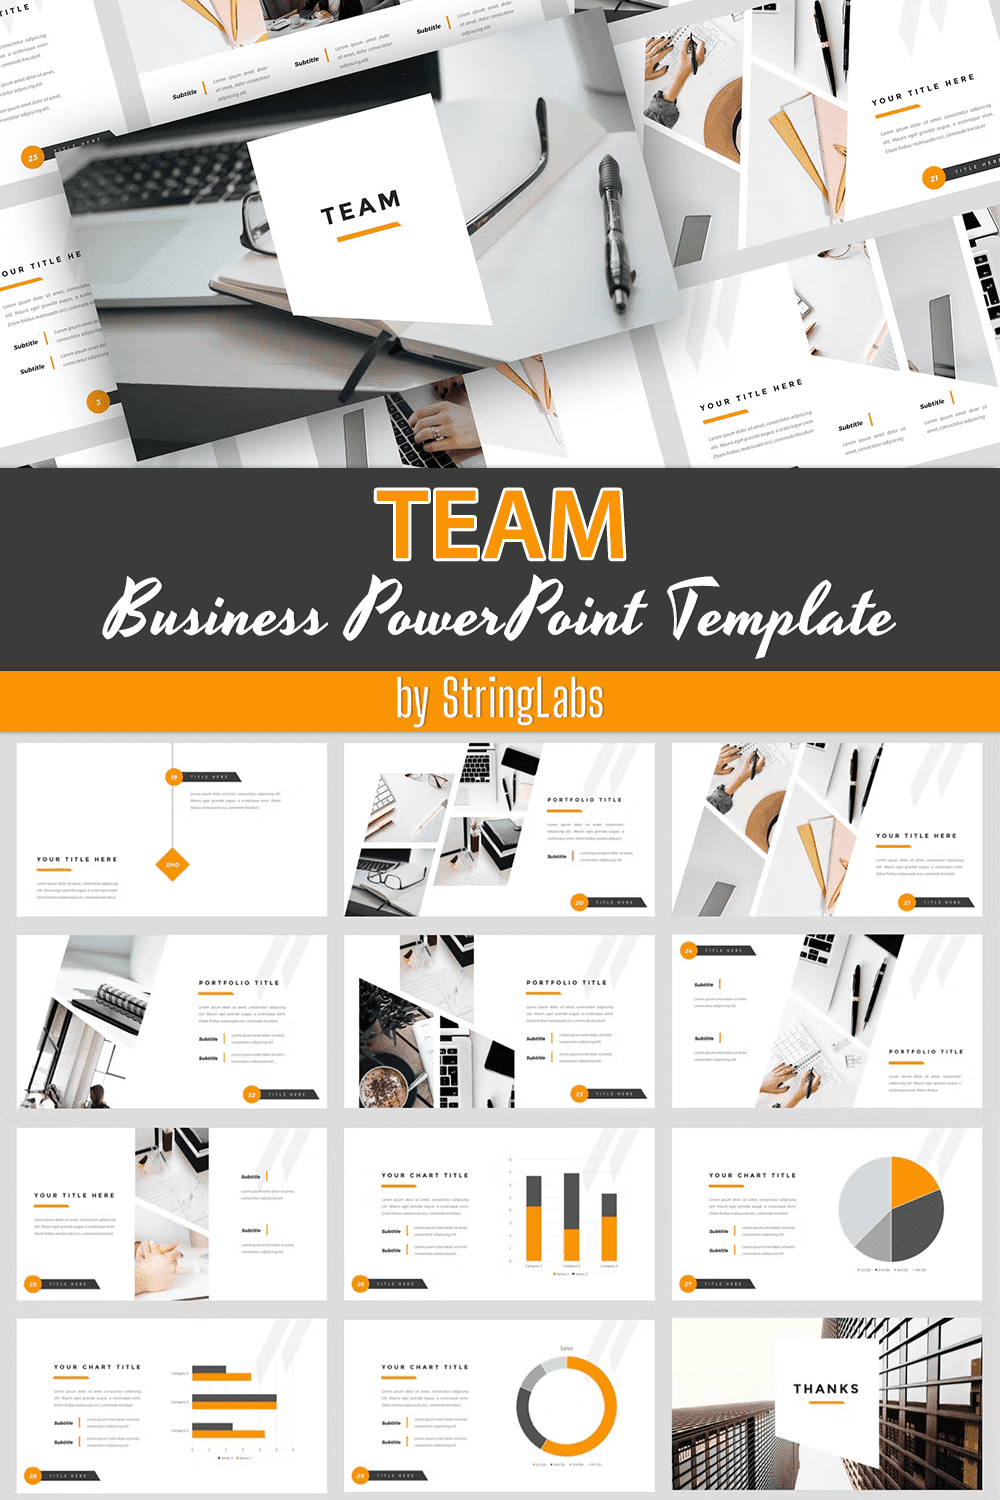 A collection of images of amazing presentation template slides on the topic of a business team.